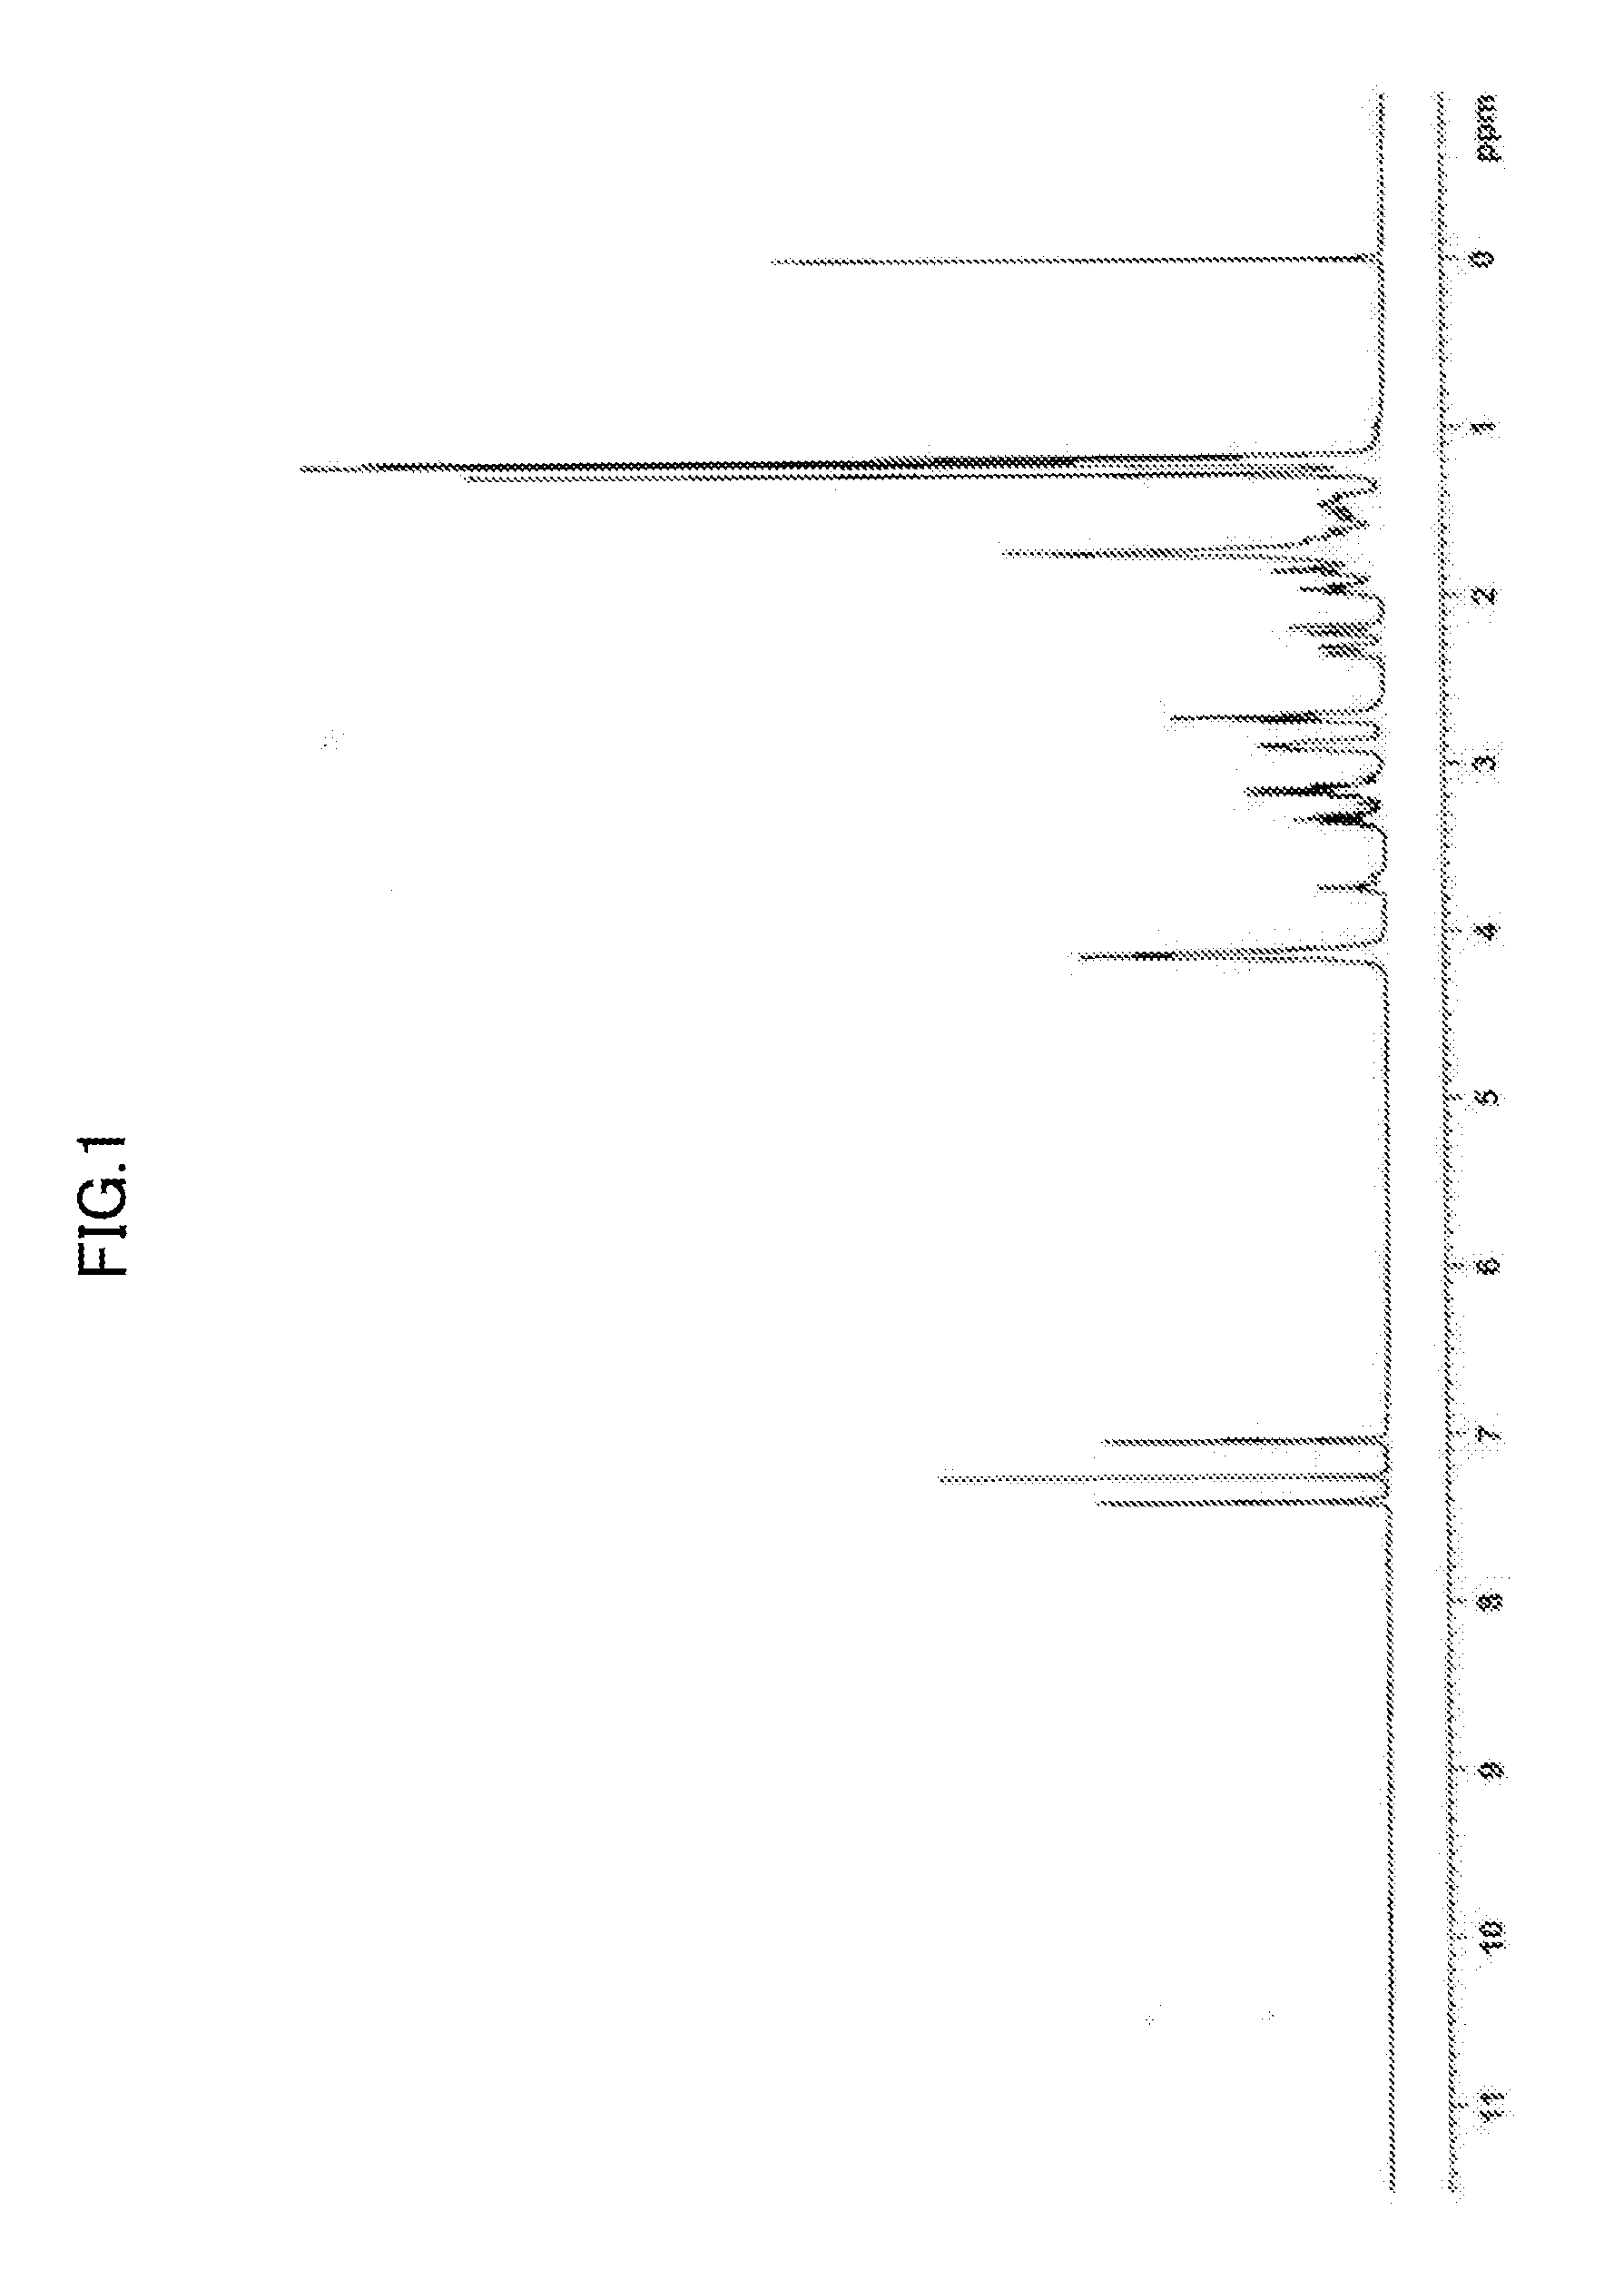 Polymer derived from dehydroabietic acid and uses thereof